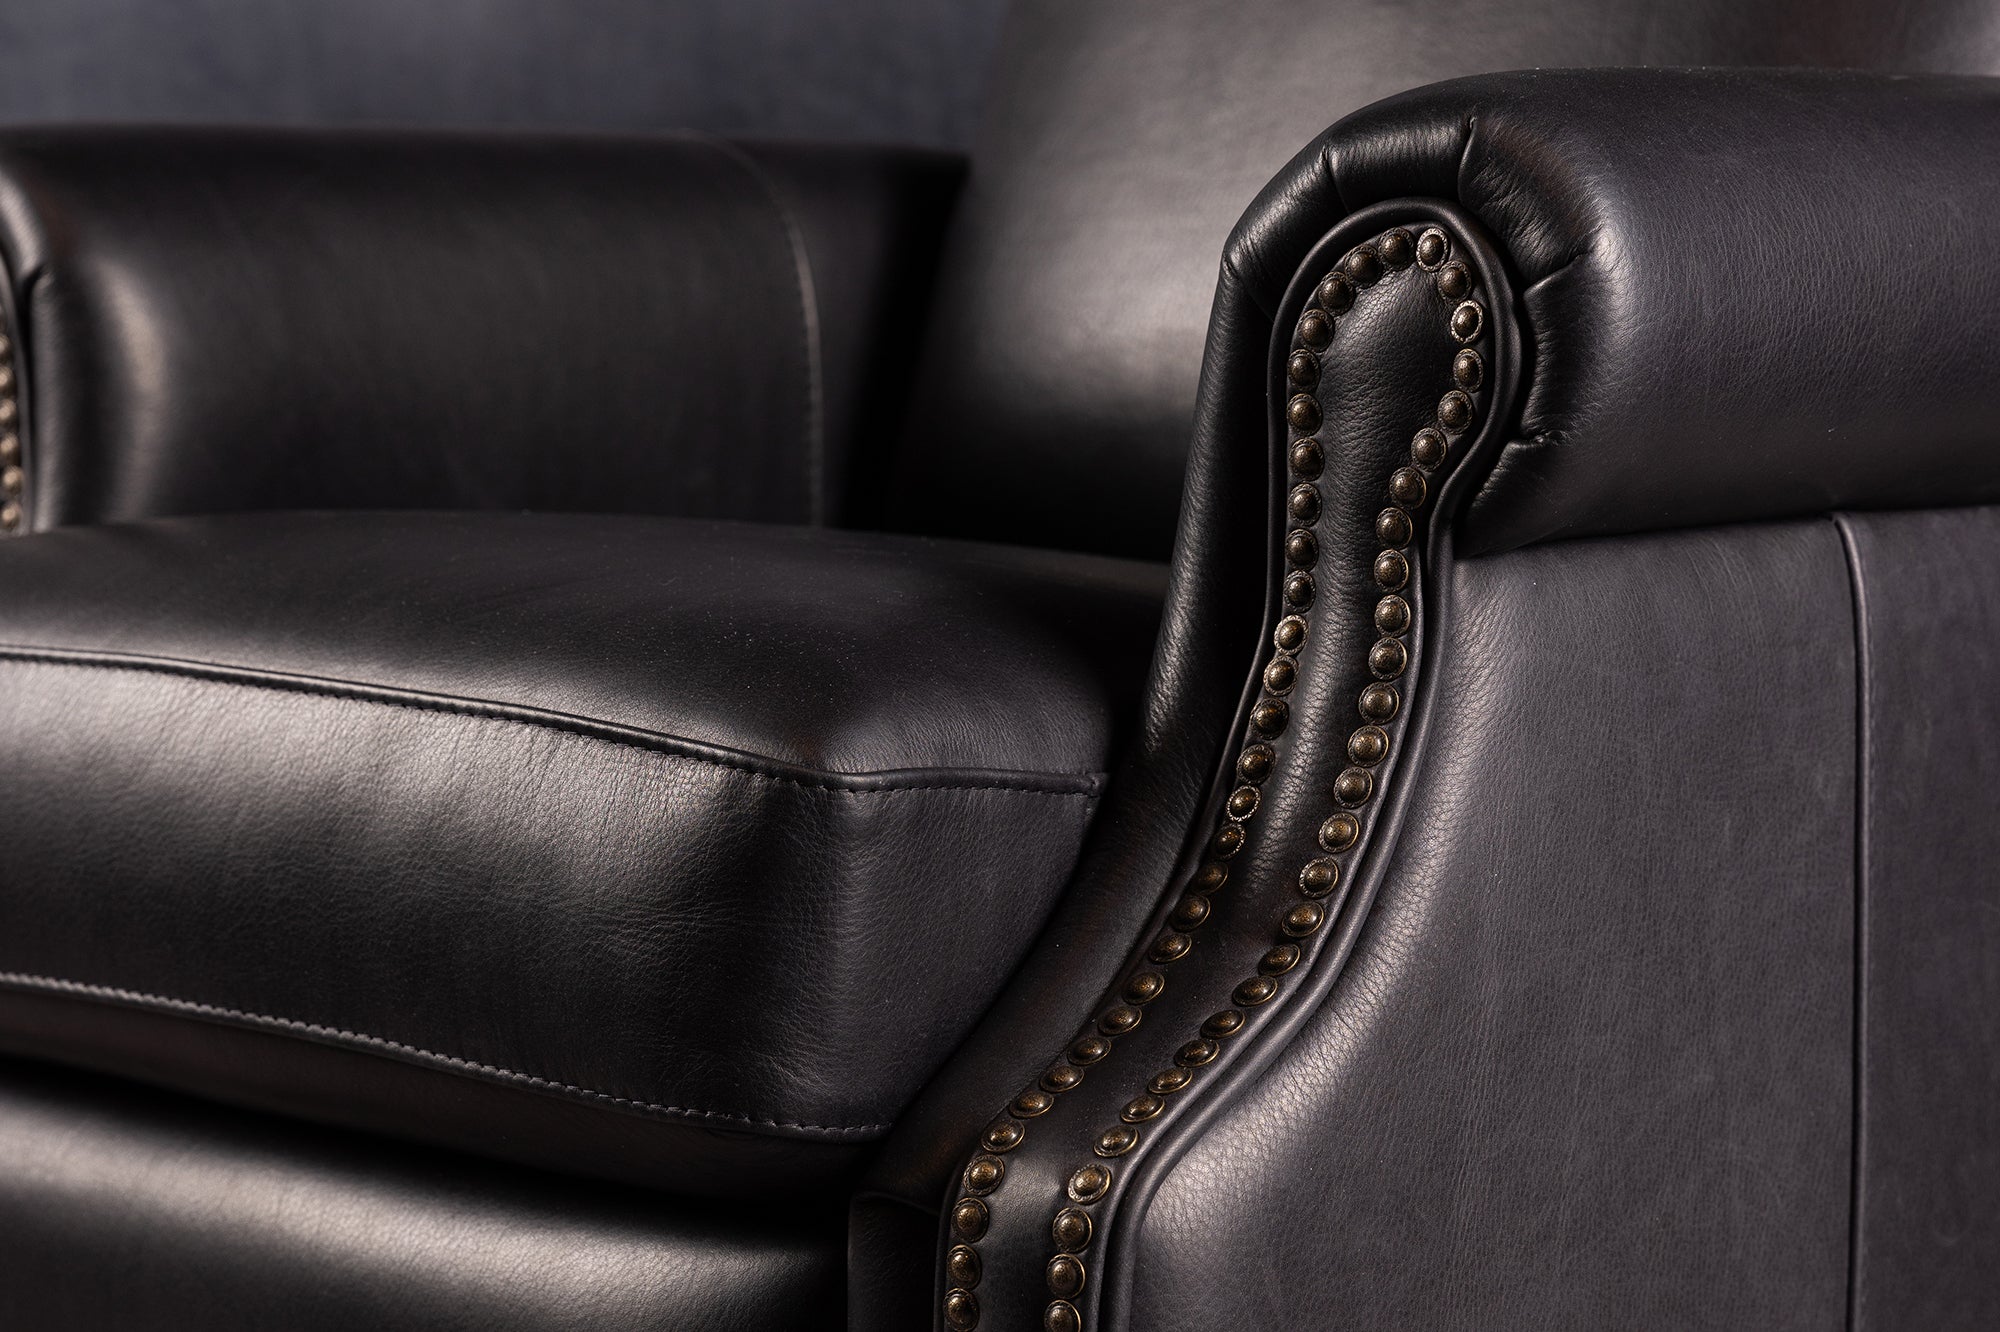 LORD BARON RECLINER CHAIR